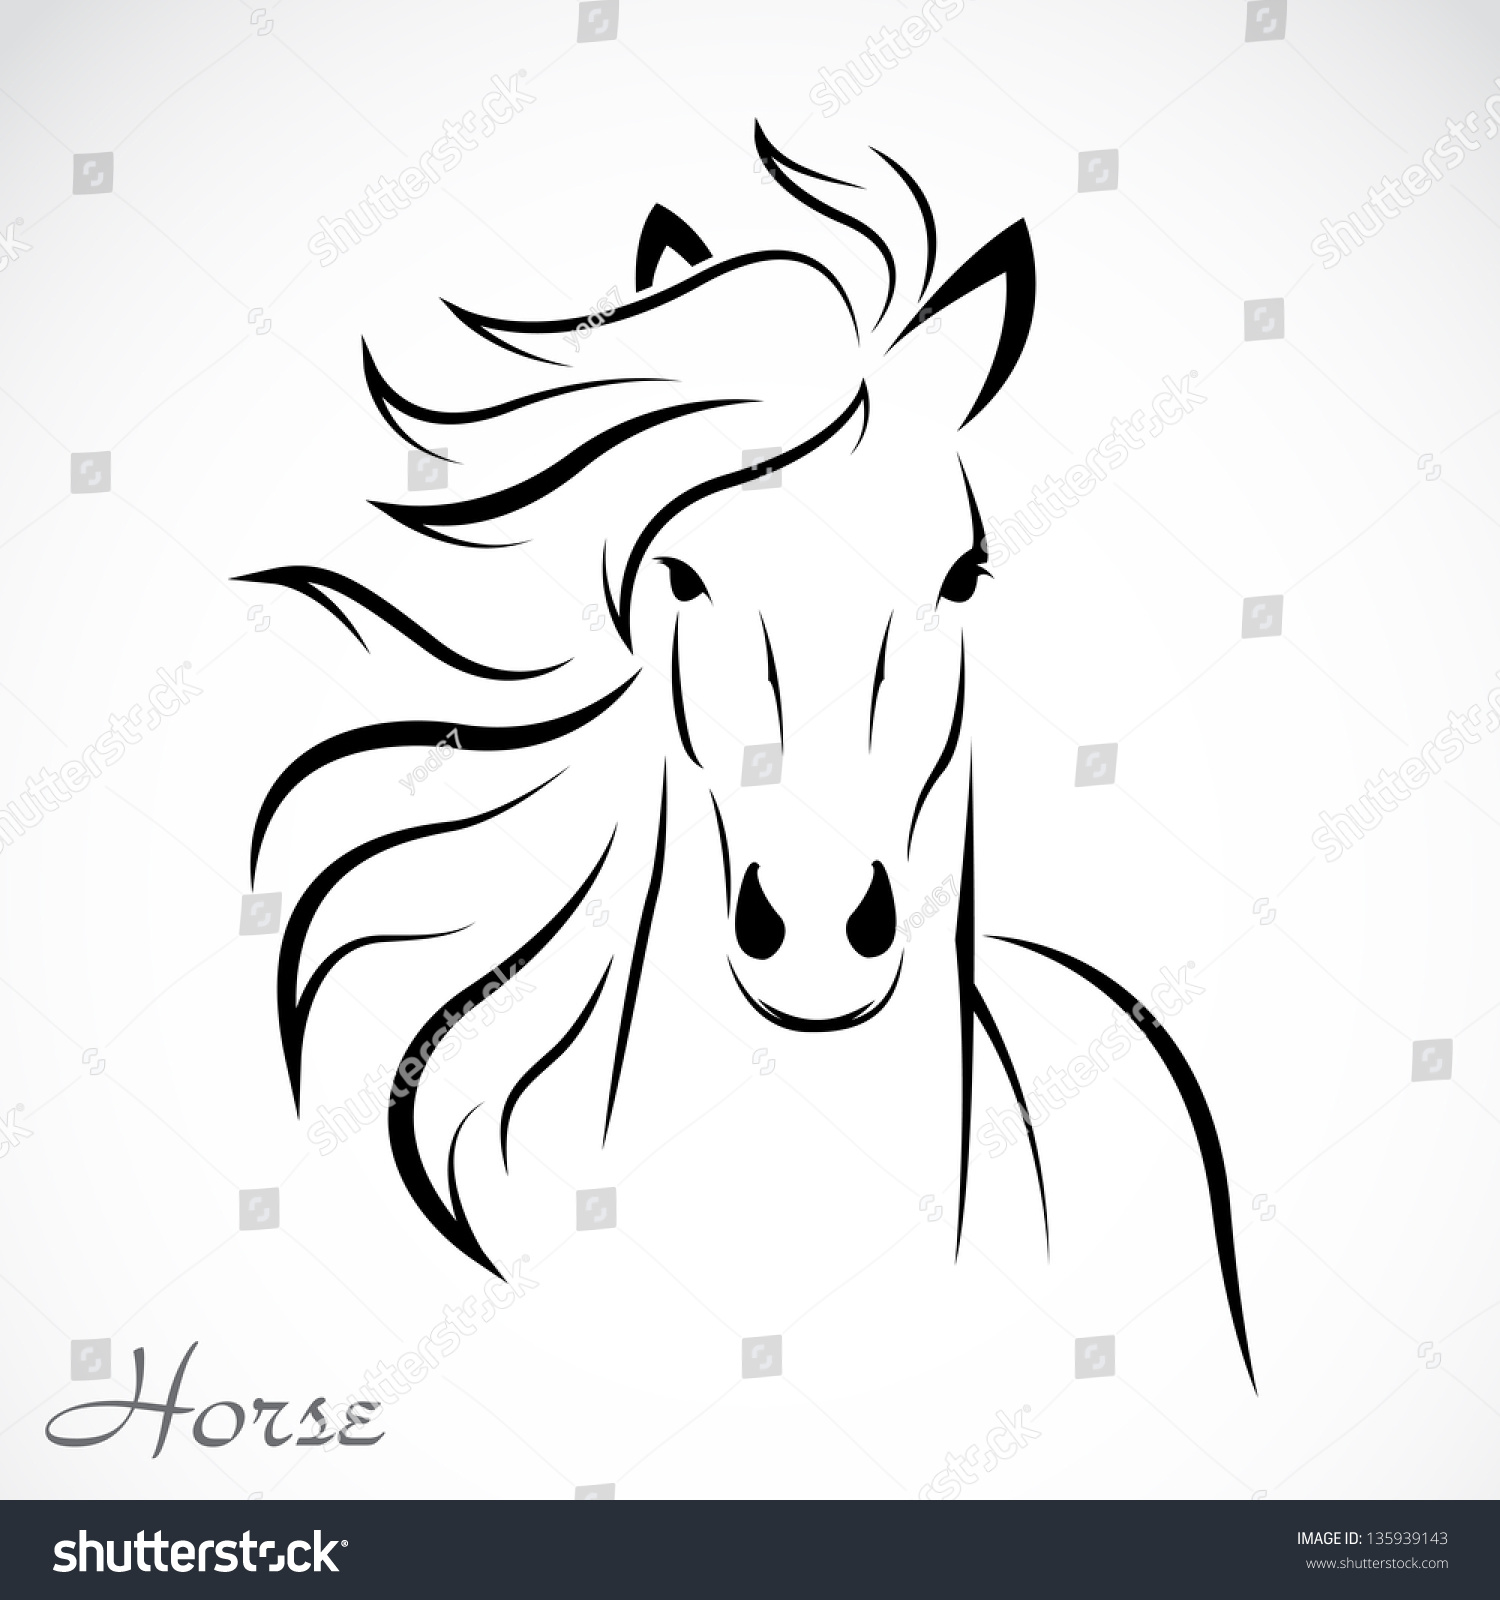 Vector Image Of An Horse On White Background - 135939143 : Shutterstock